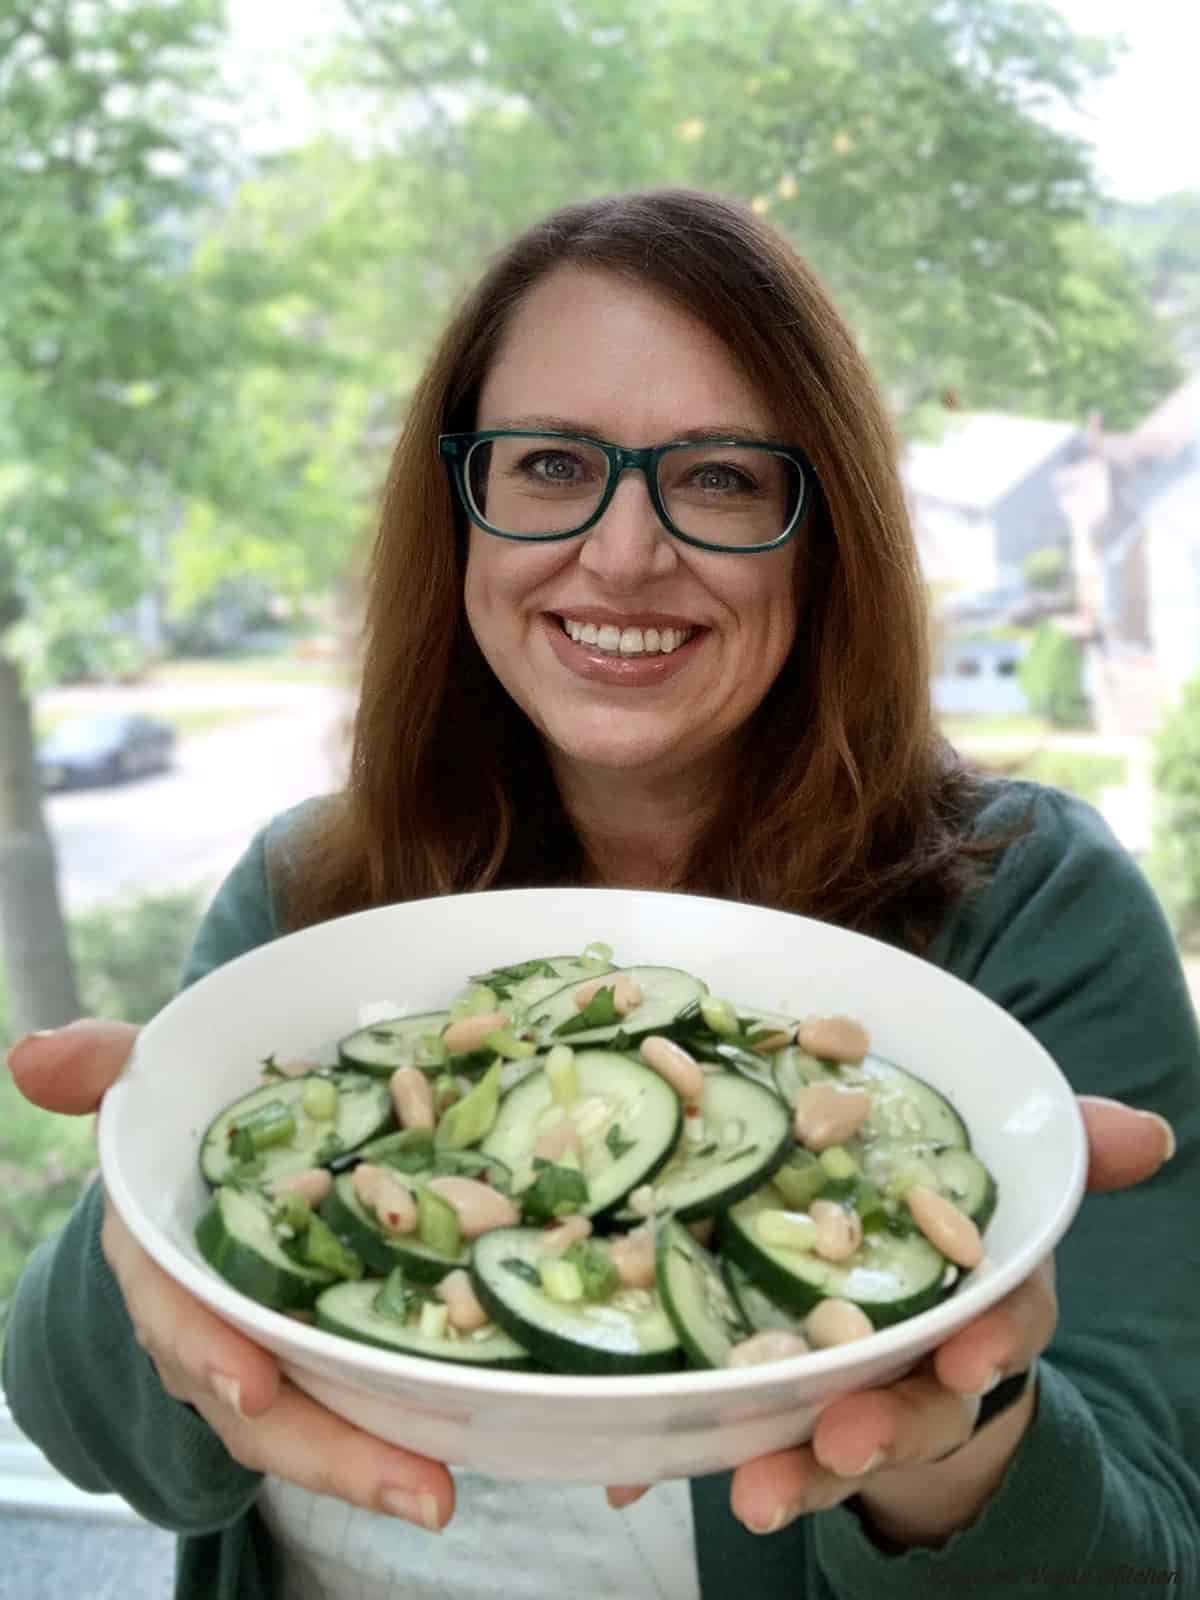 Dianne holding up a bowl of cucumber salad